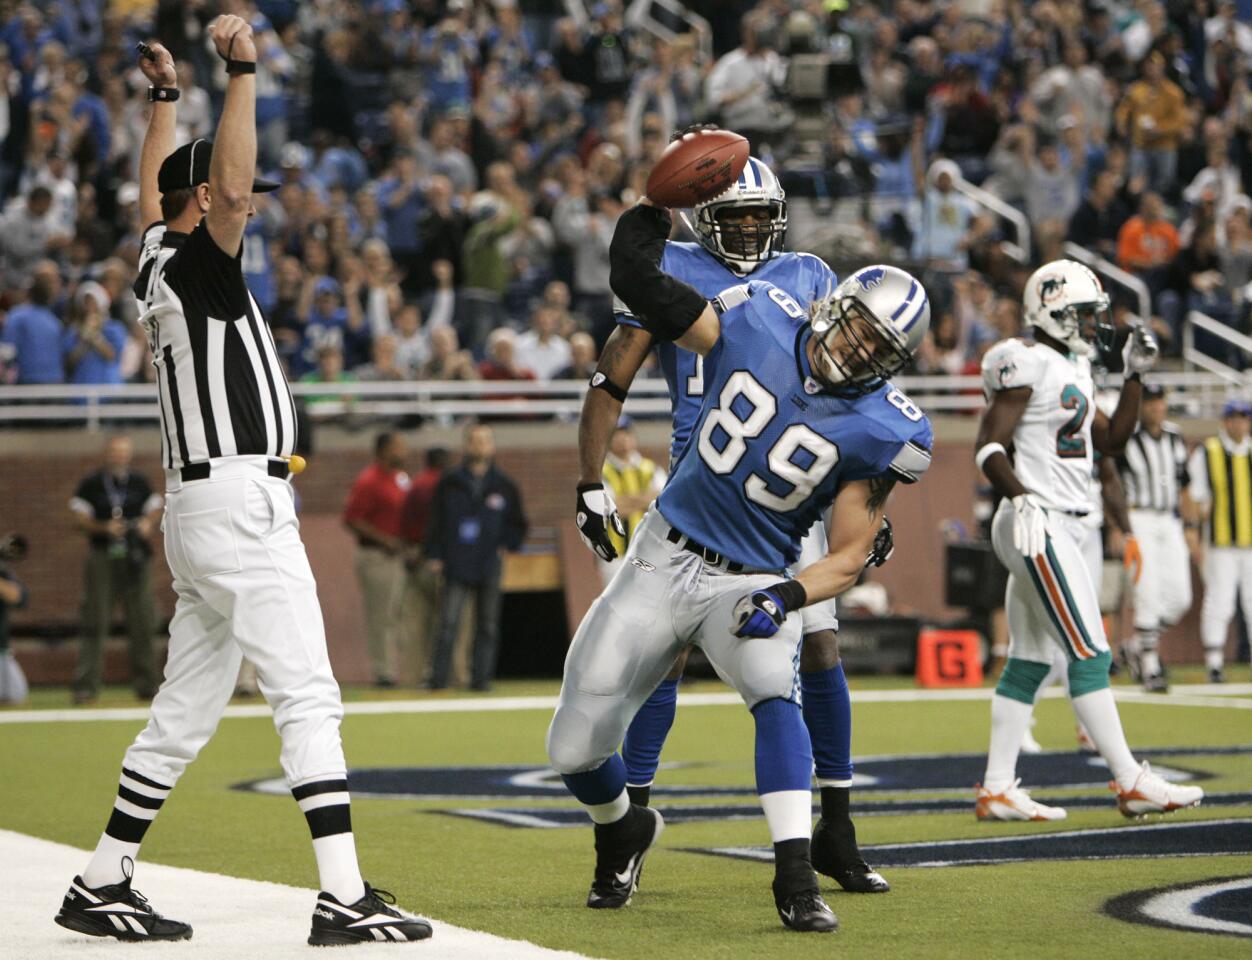 Detroit Lions tight end Dan Campbell celebrates a two-yard touchdown reception against the Miami Dolphins in the first quarter of a NFL football game, Thursday, Nov. 23, 2006, in Detroit. (AP Photo/Paul Sancya)